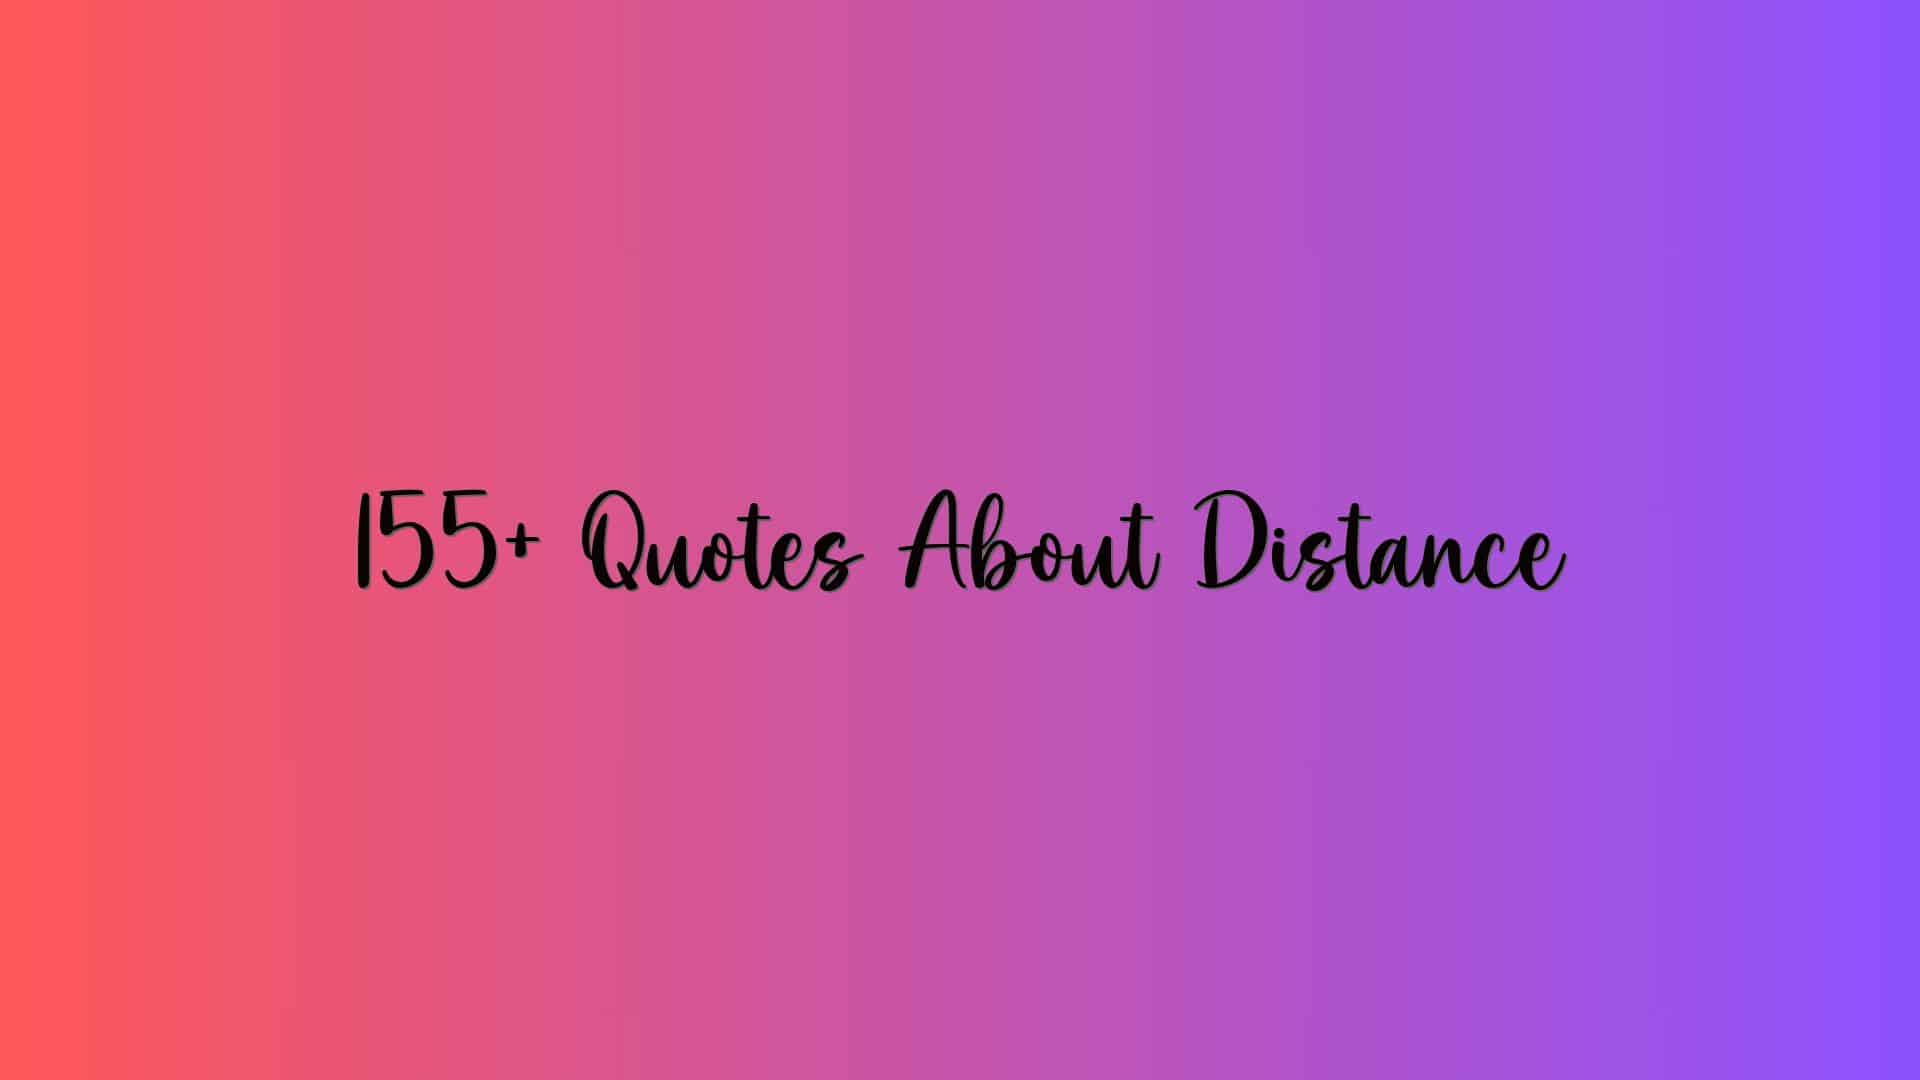 155+ Quotes About Distance